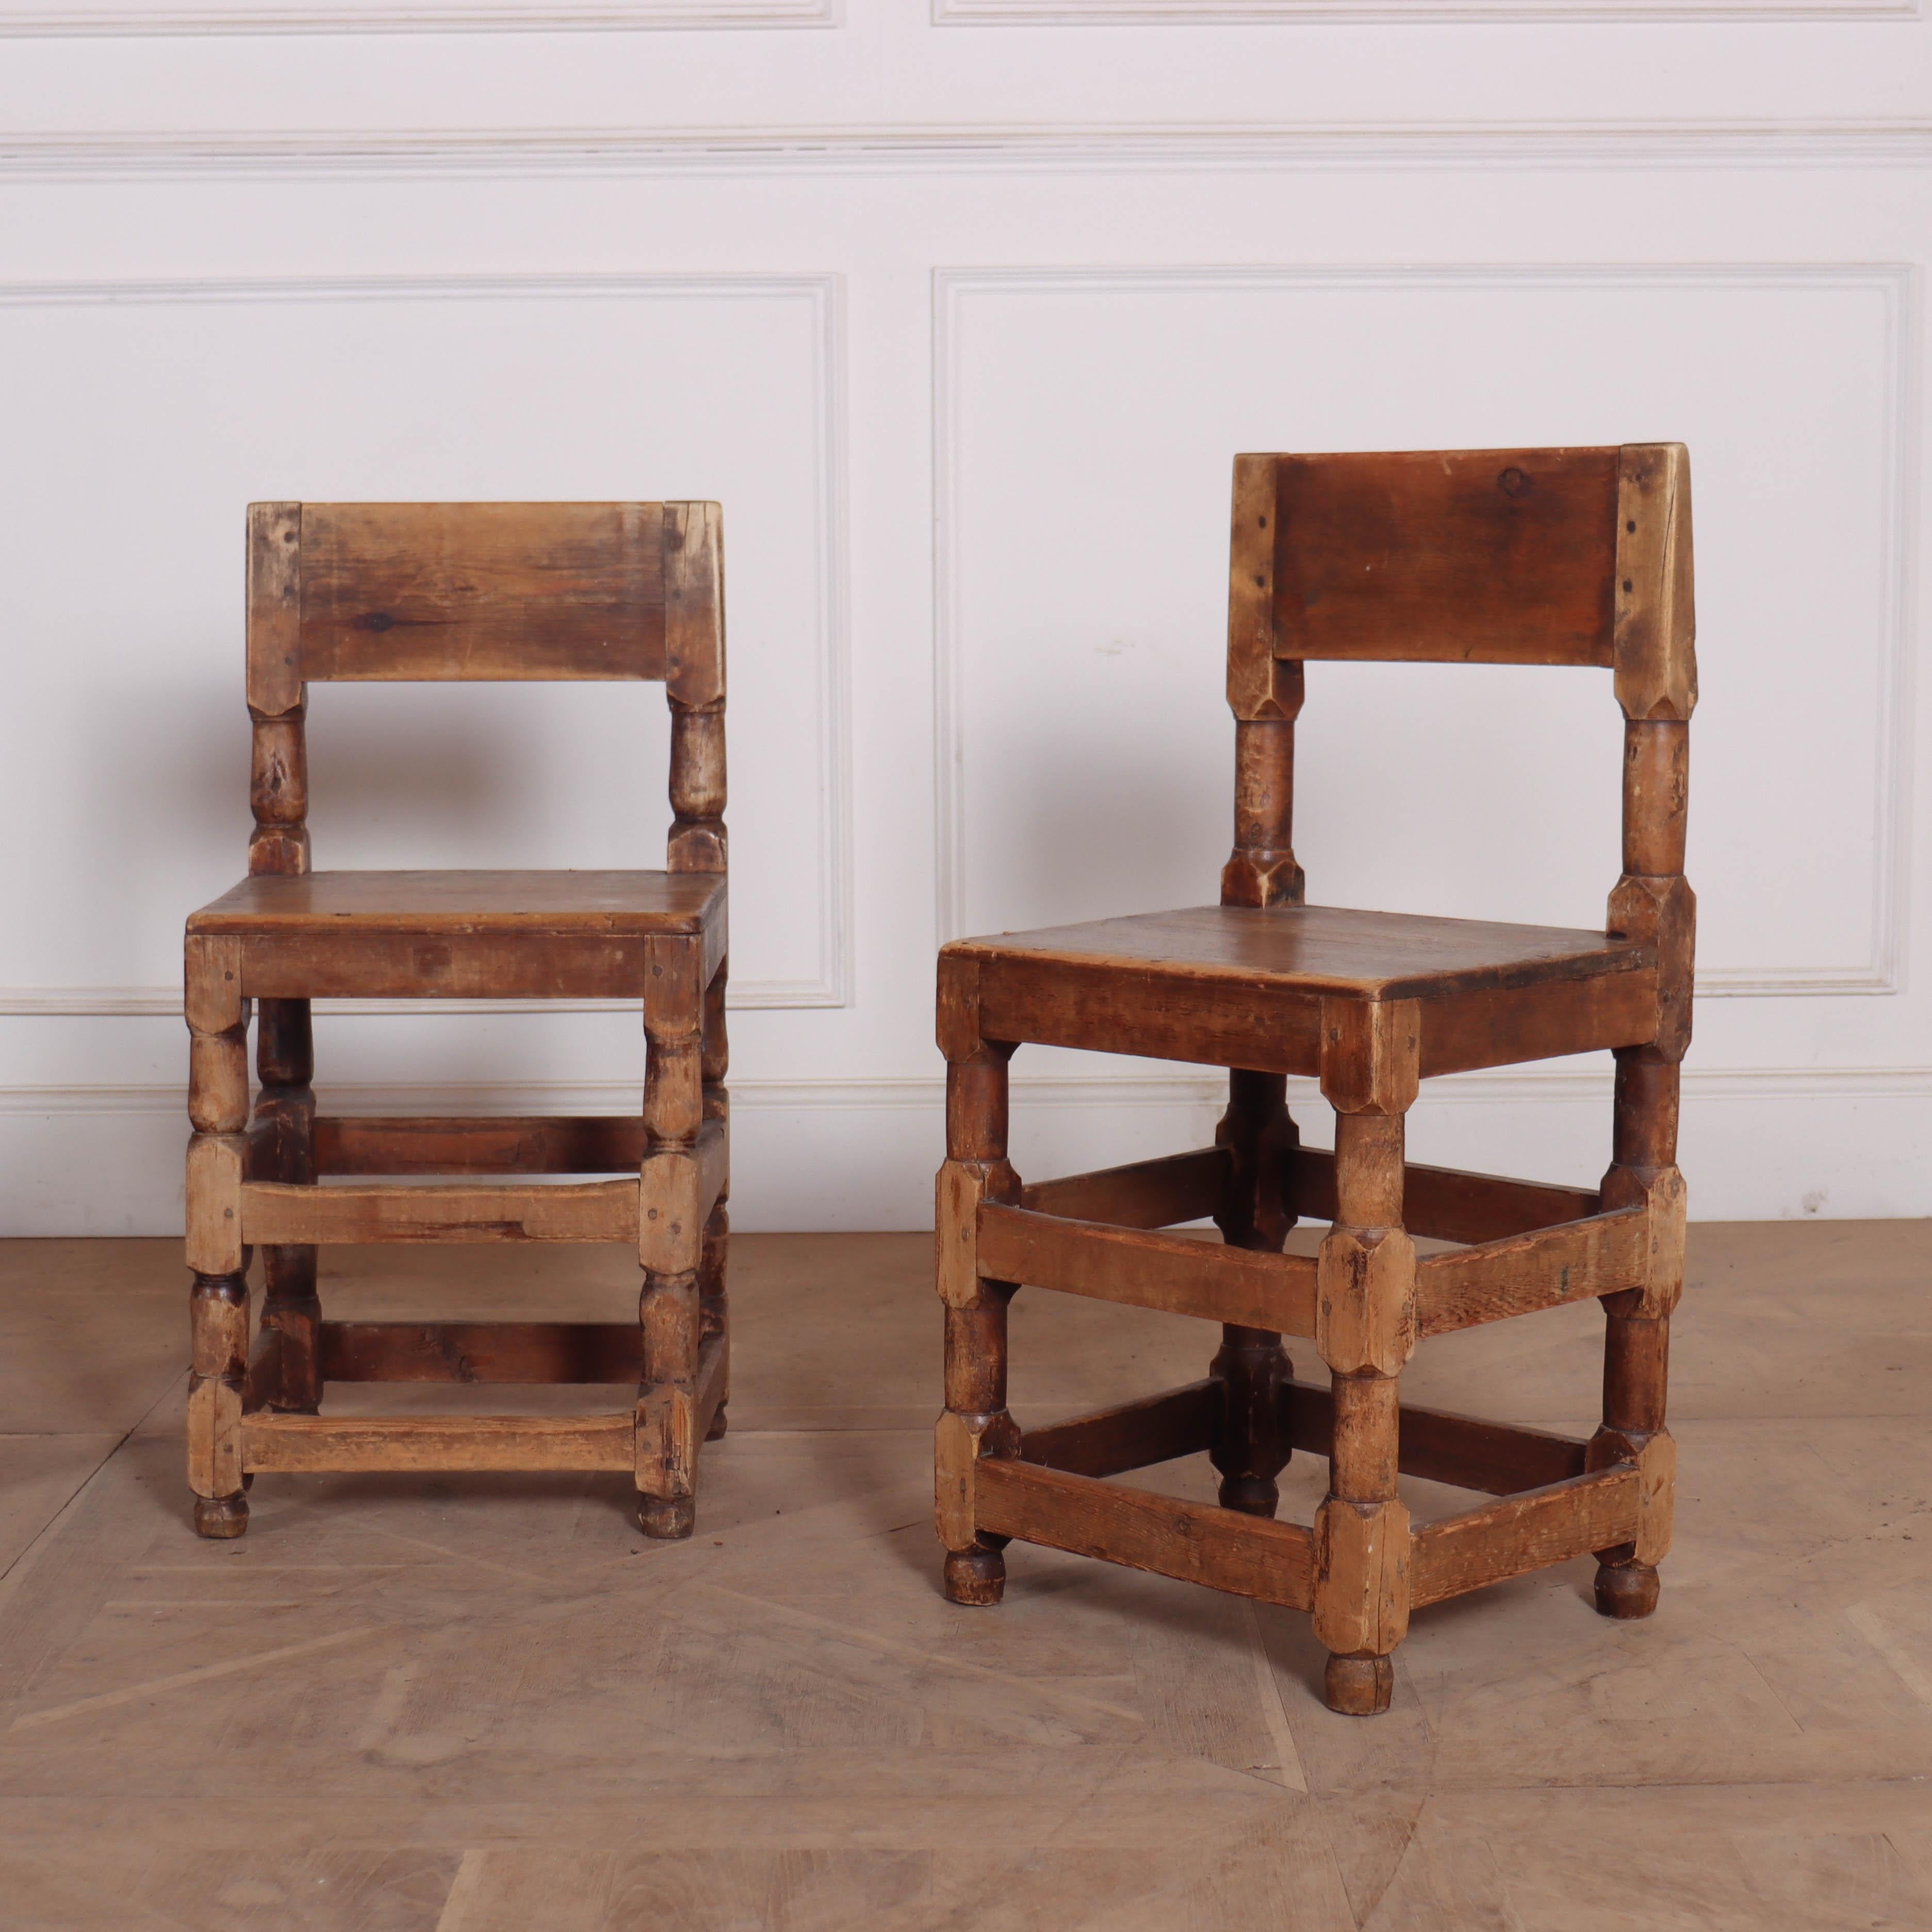 Set of 4 18th C Swedish chairs with a worn pine finish. 1780.

Seat height is 19